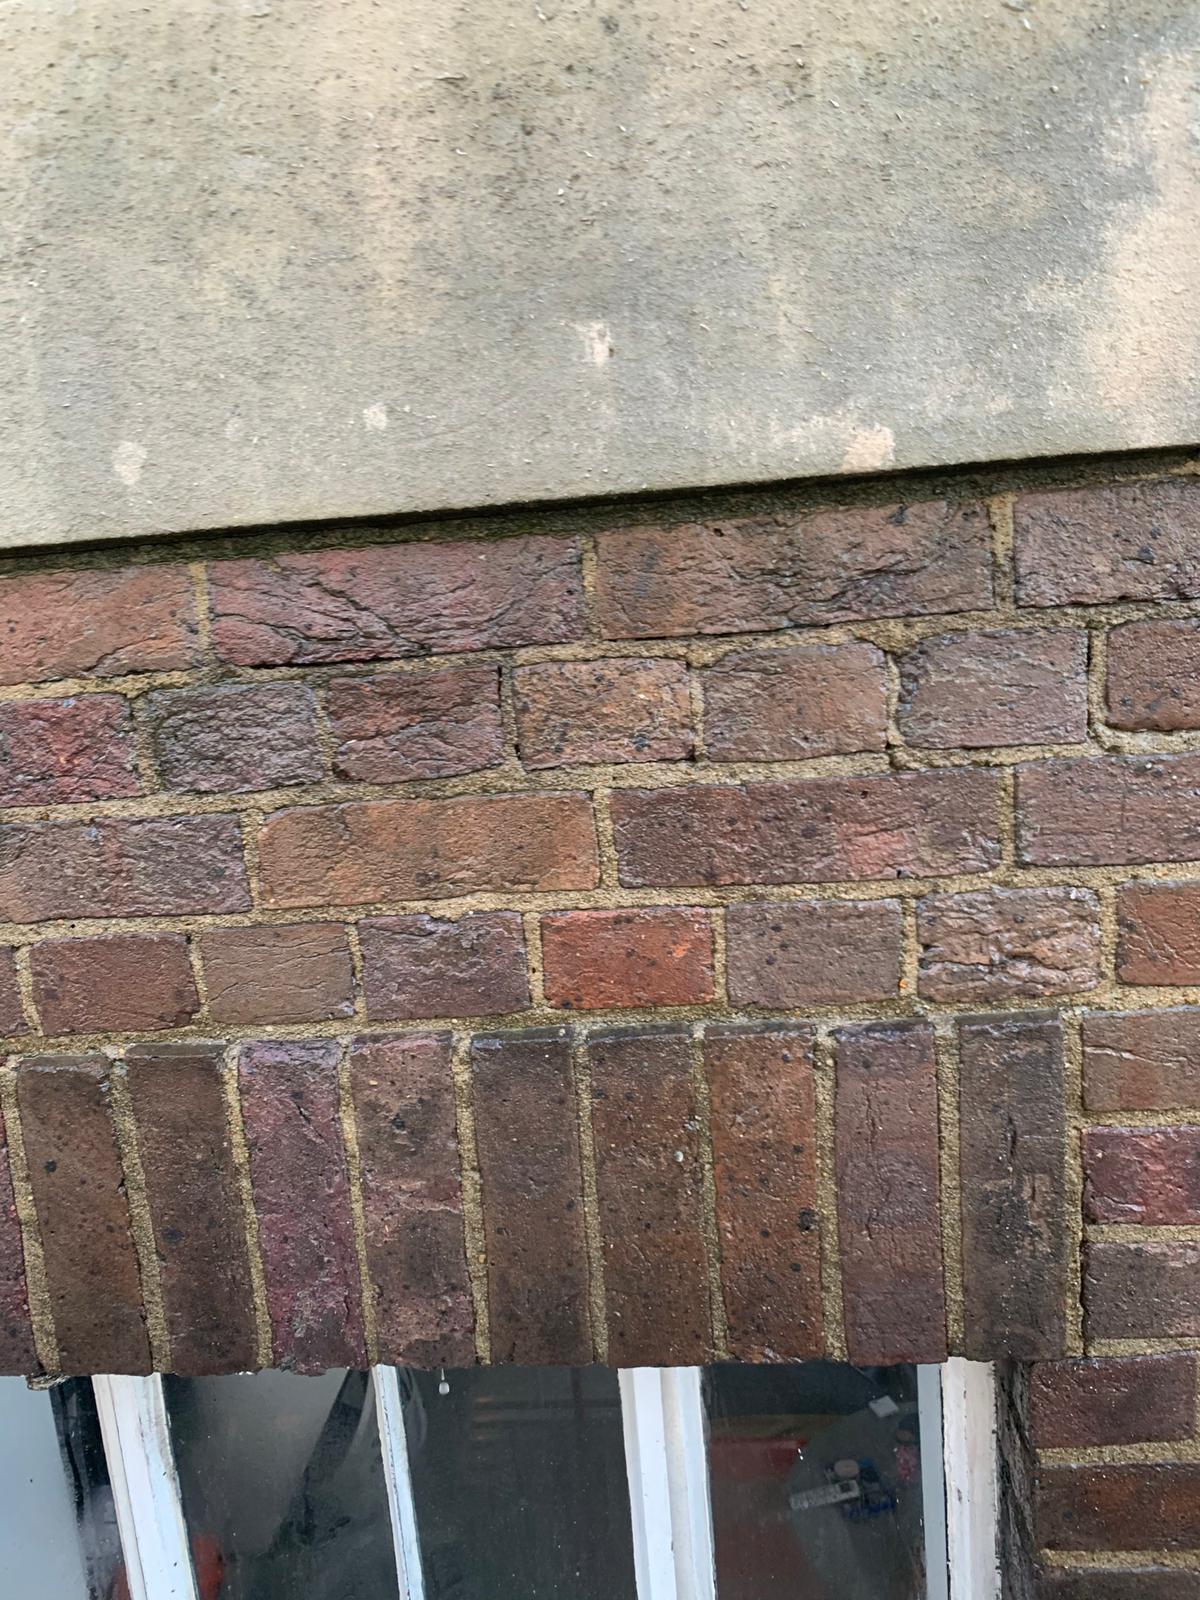 Brick Cleaning at High Levels using Rope Access (or Abseil) cleaning